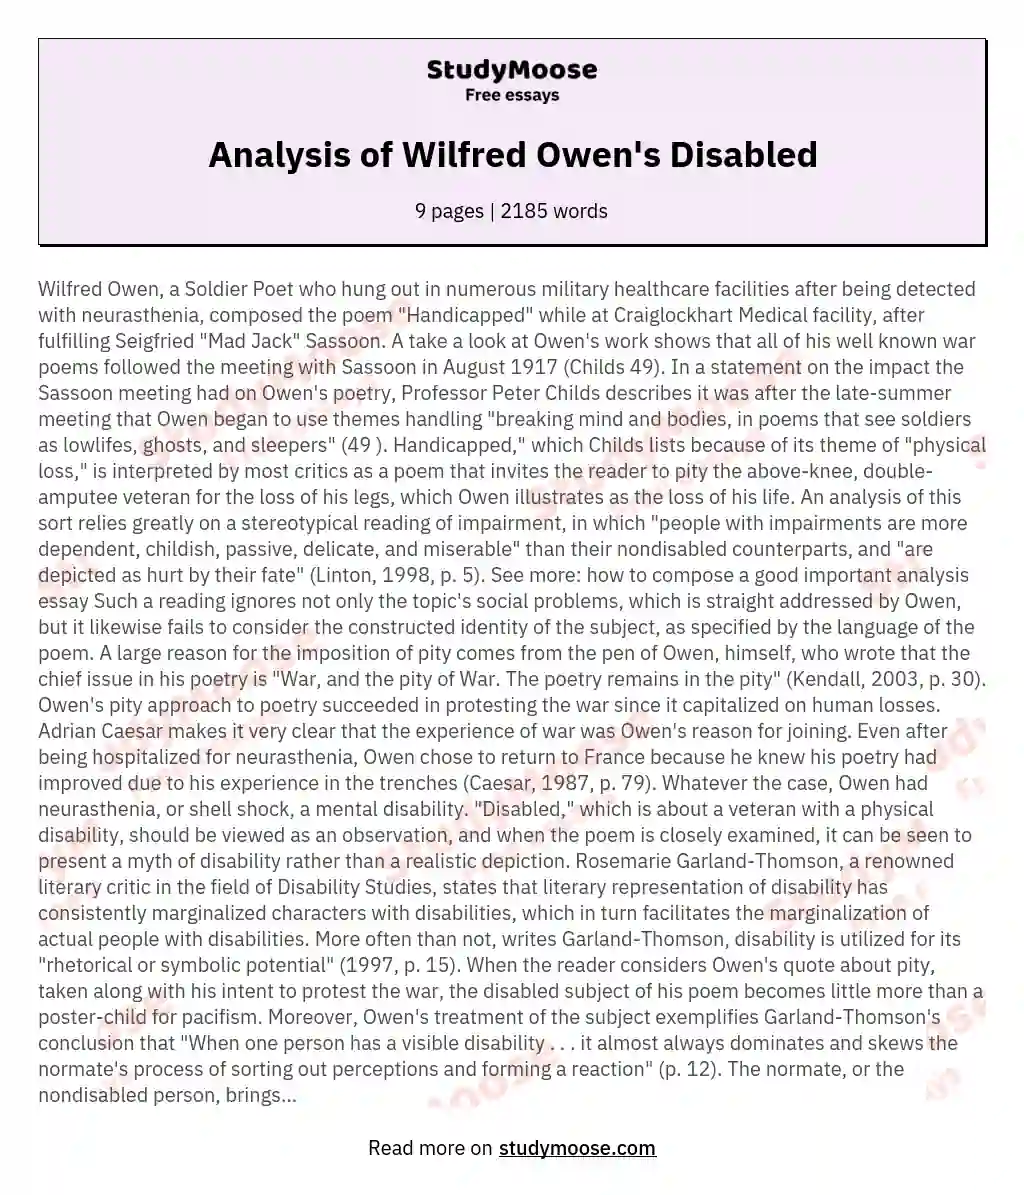 Analysis of Wilfred Owen's Disabled essay